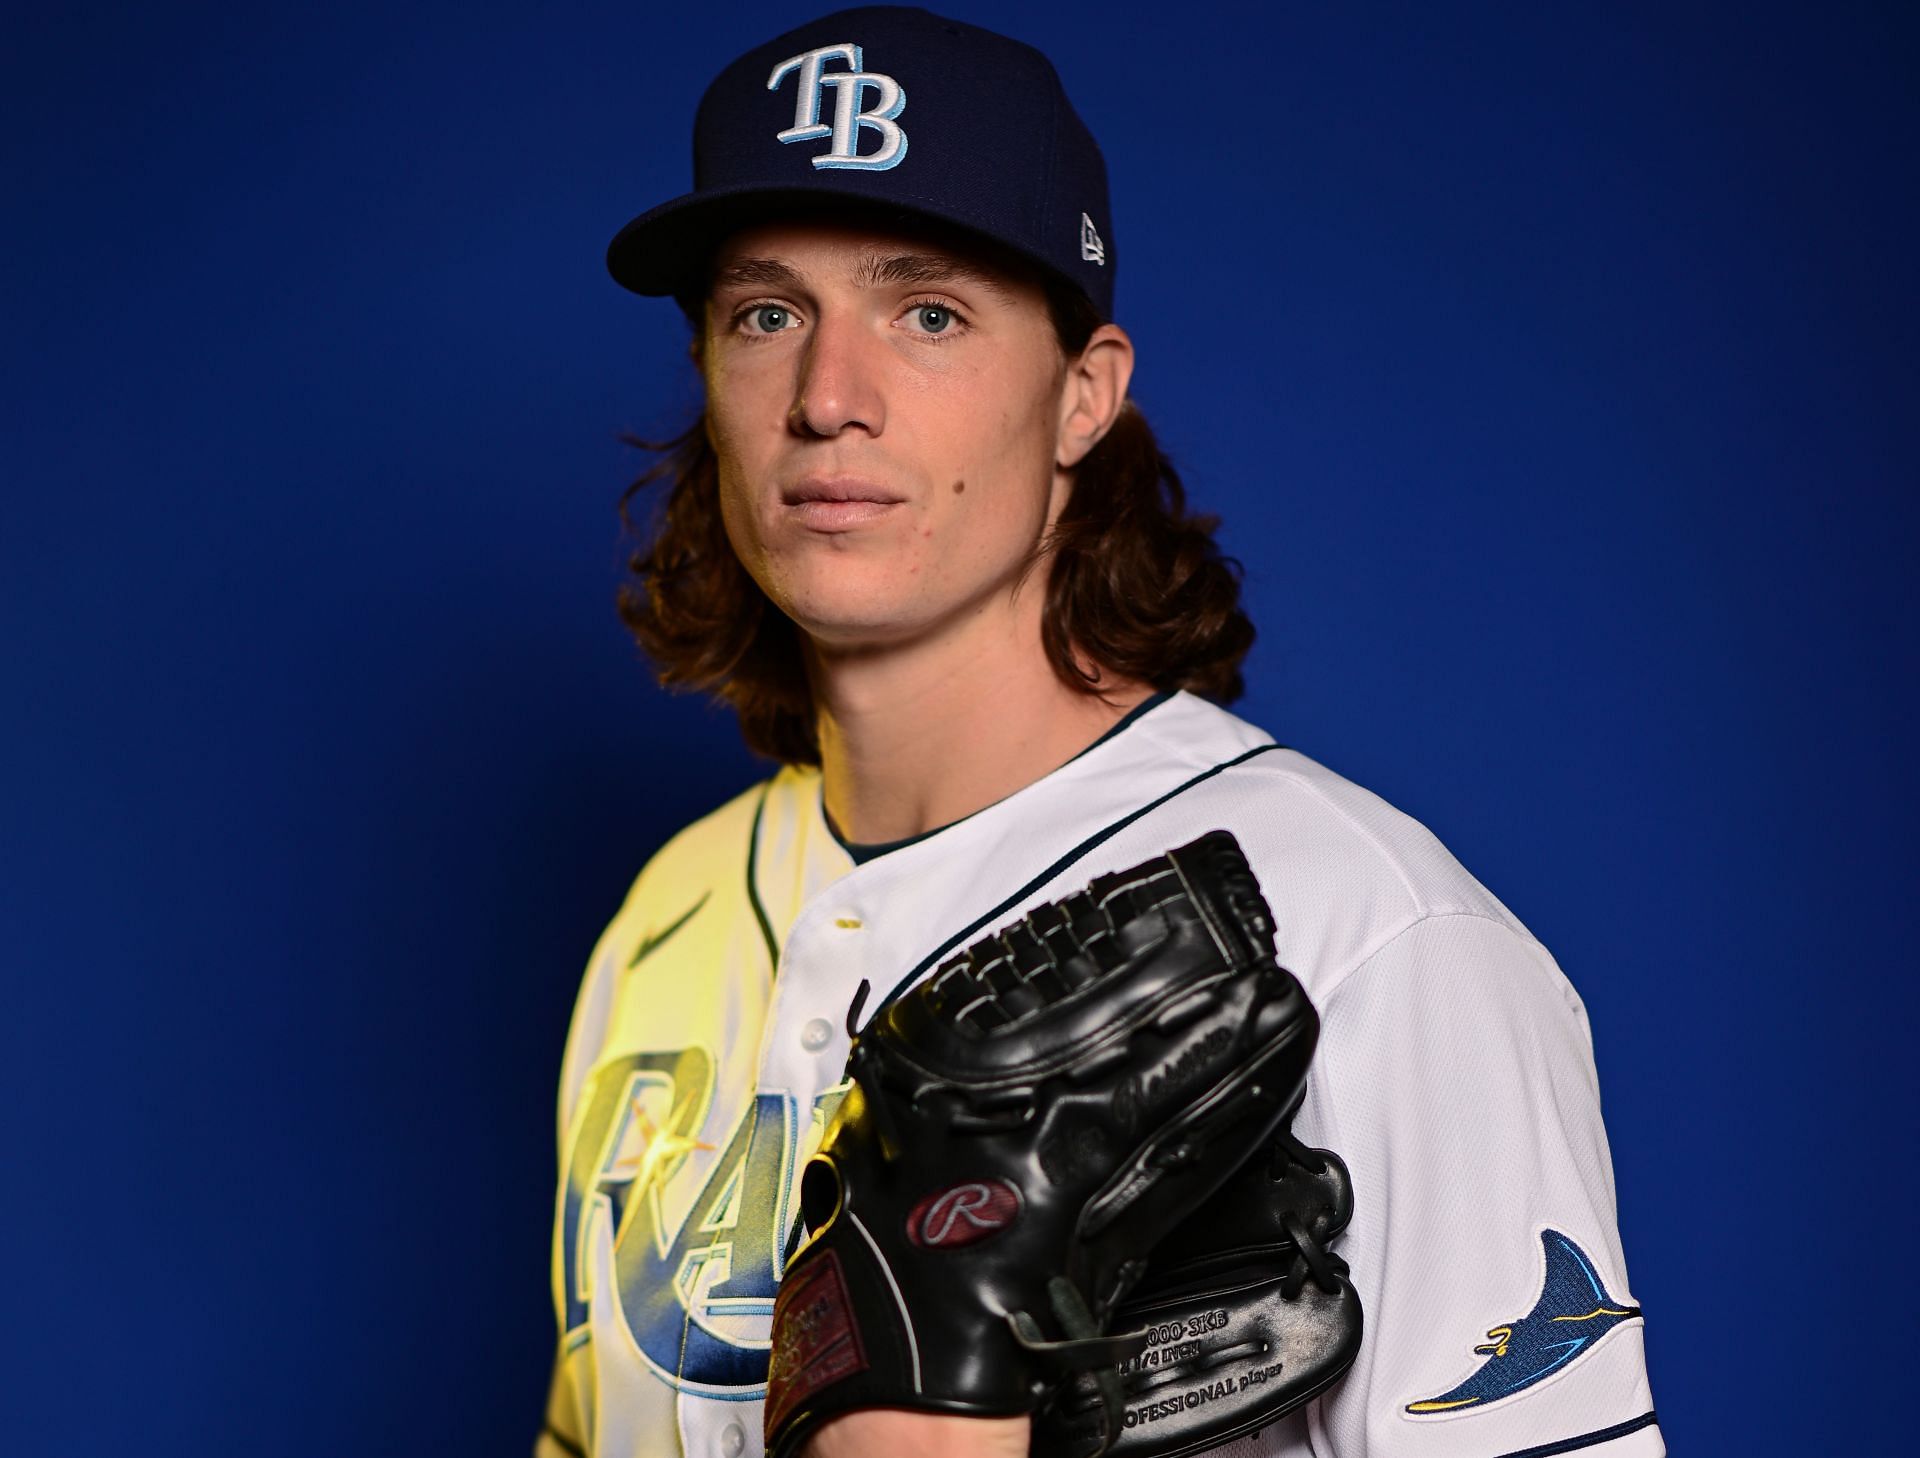 Tampa Bay Rays fans hopeful as long-injured pitcher Tyler Glasnow